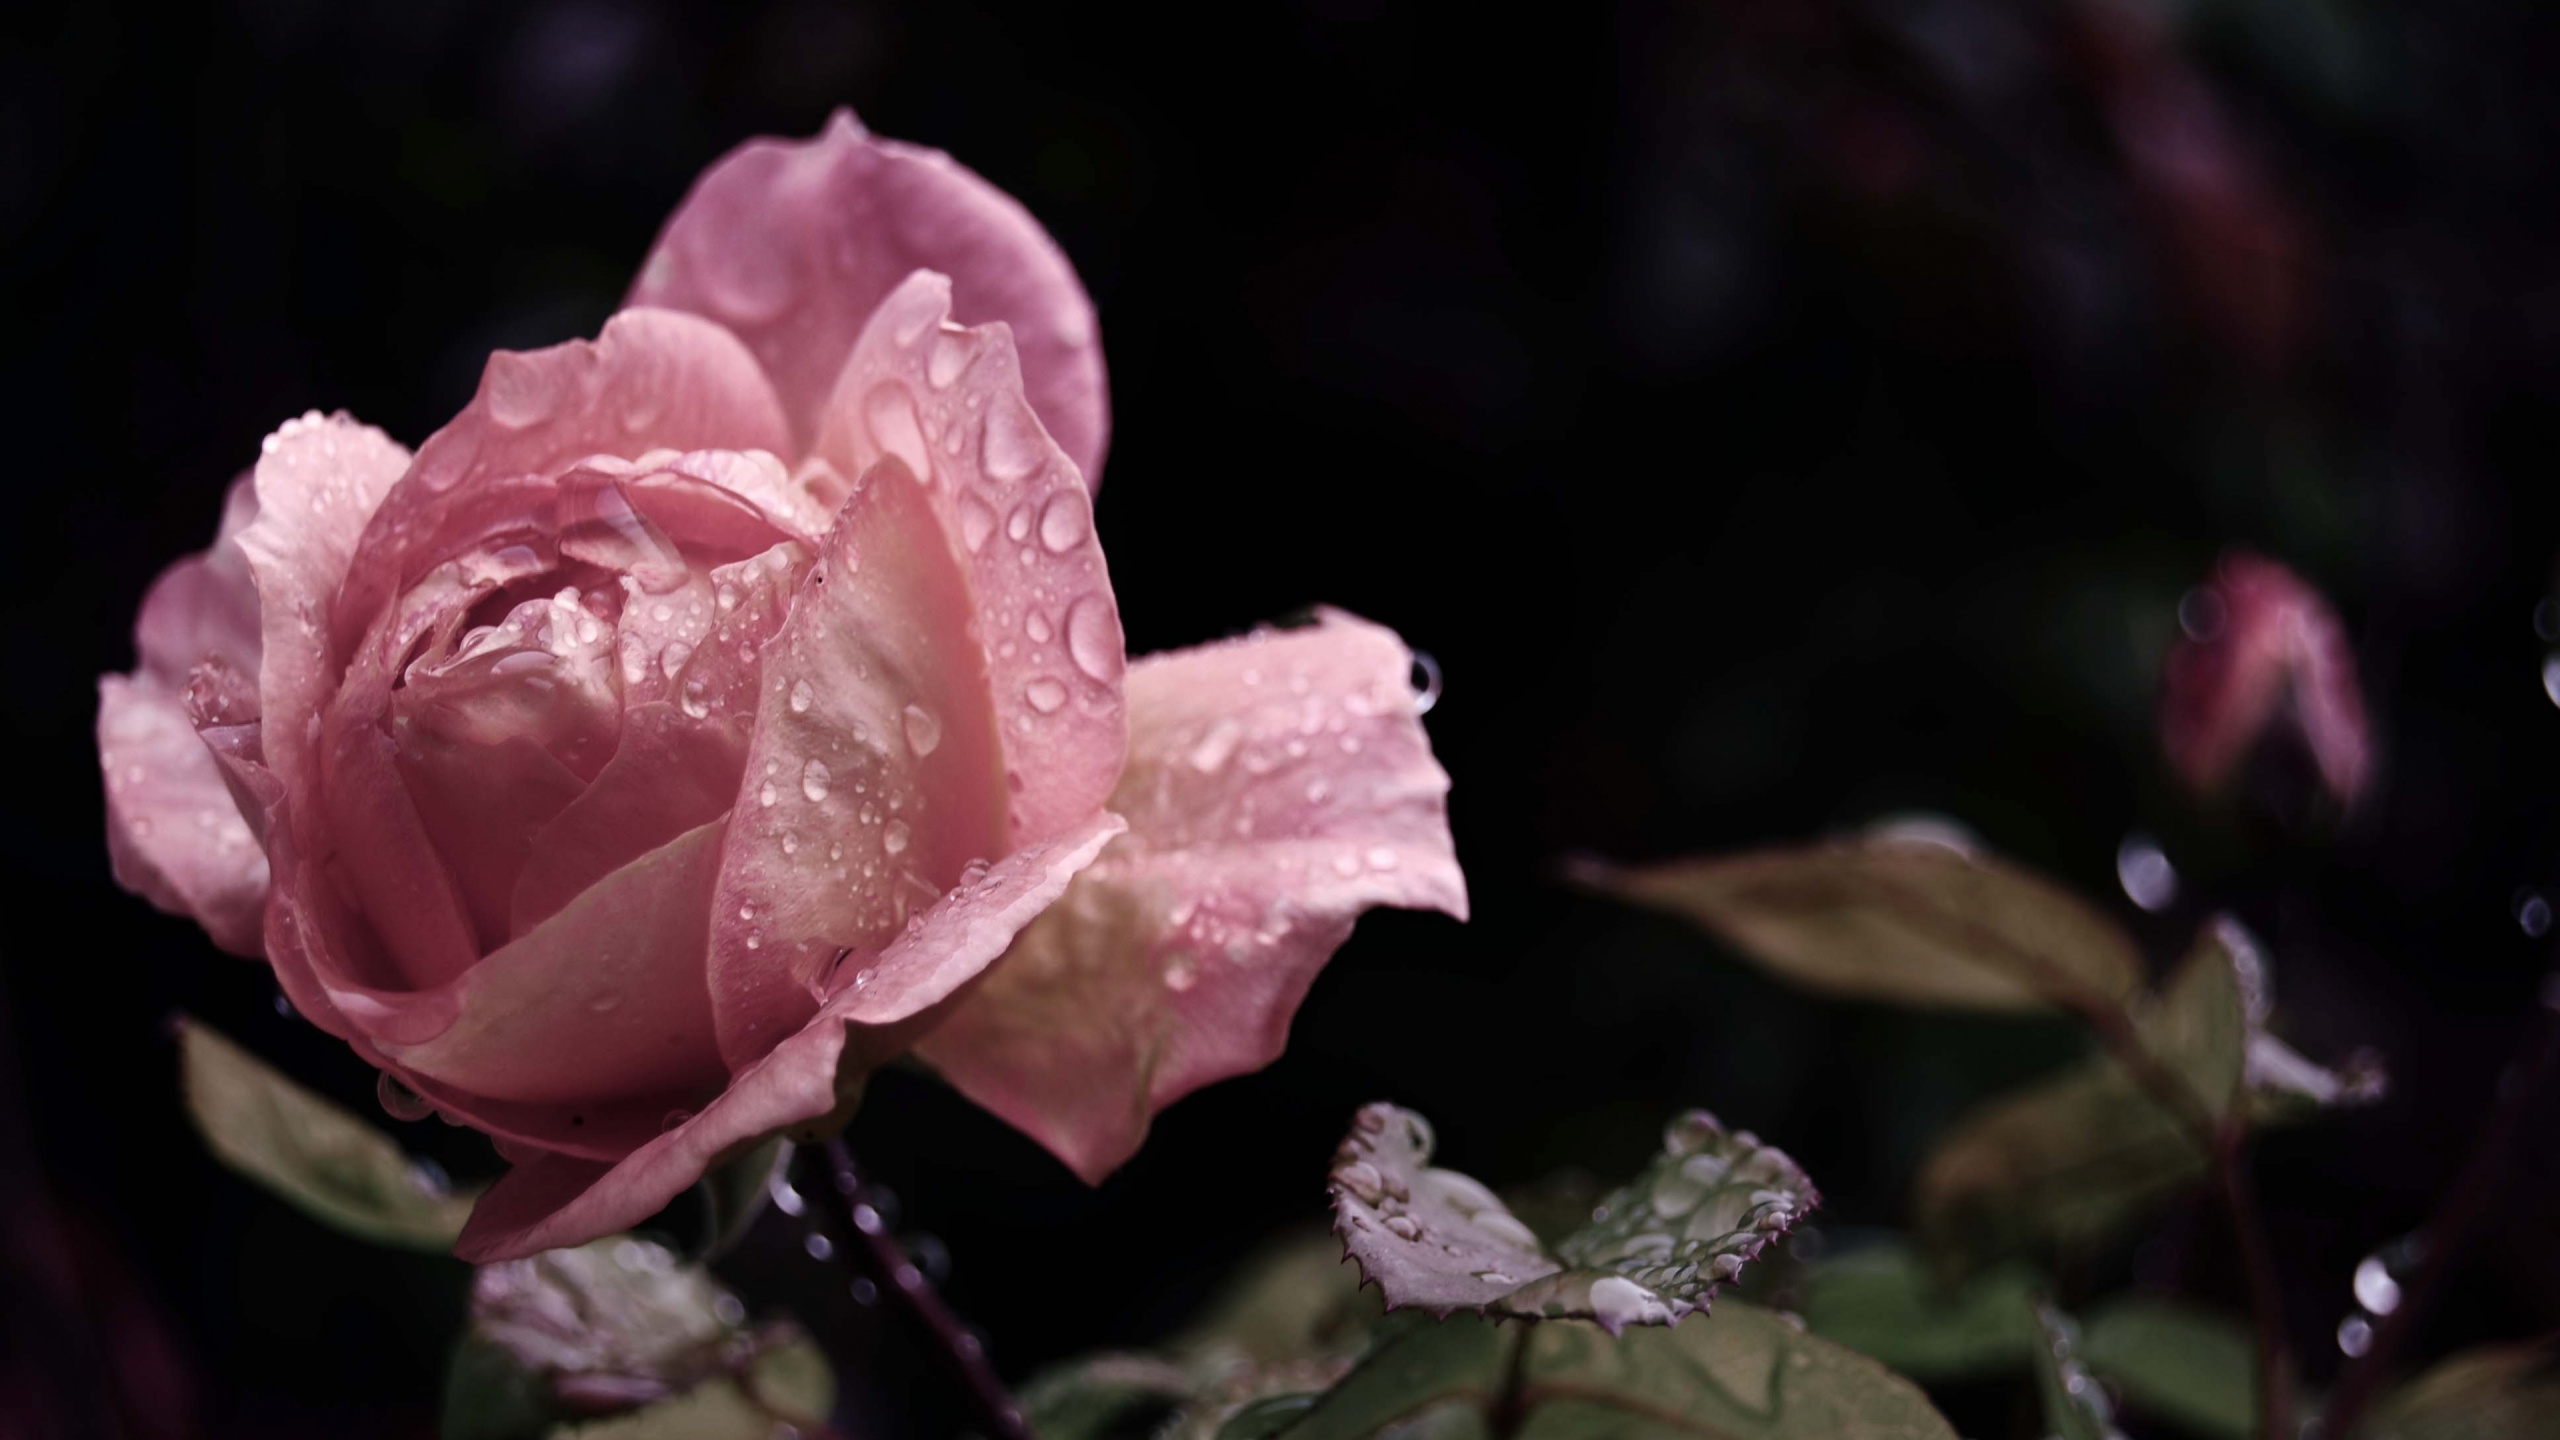 Pink Rose in Bloom During Daytime. Wallpaper in 2560x1440 Resolution